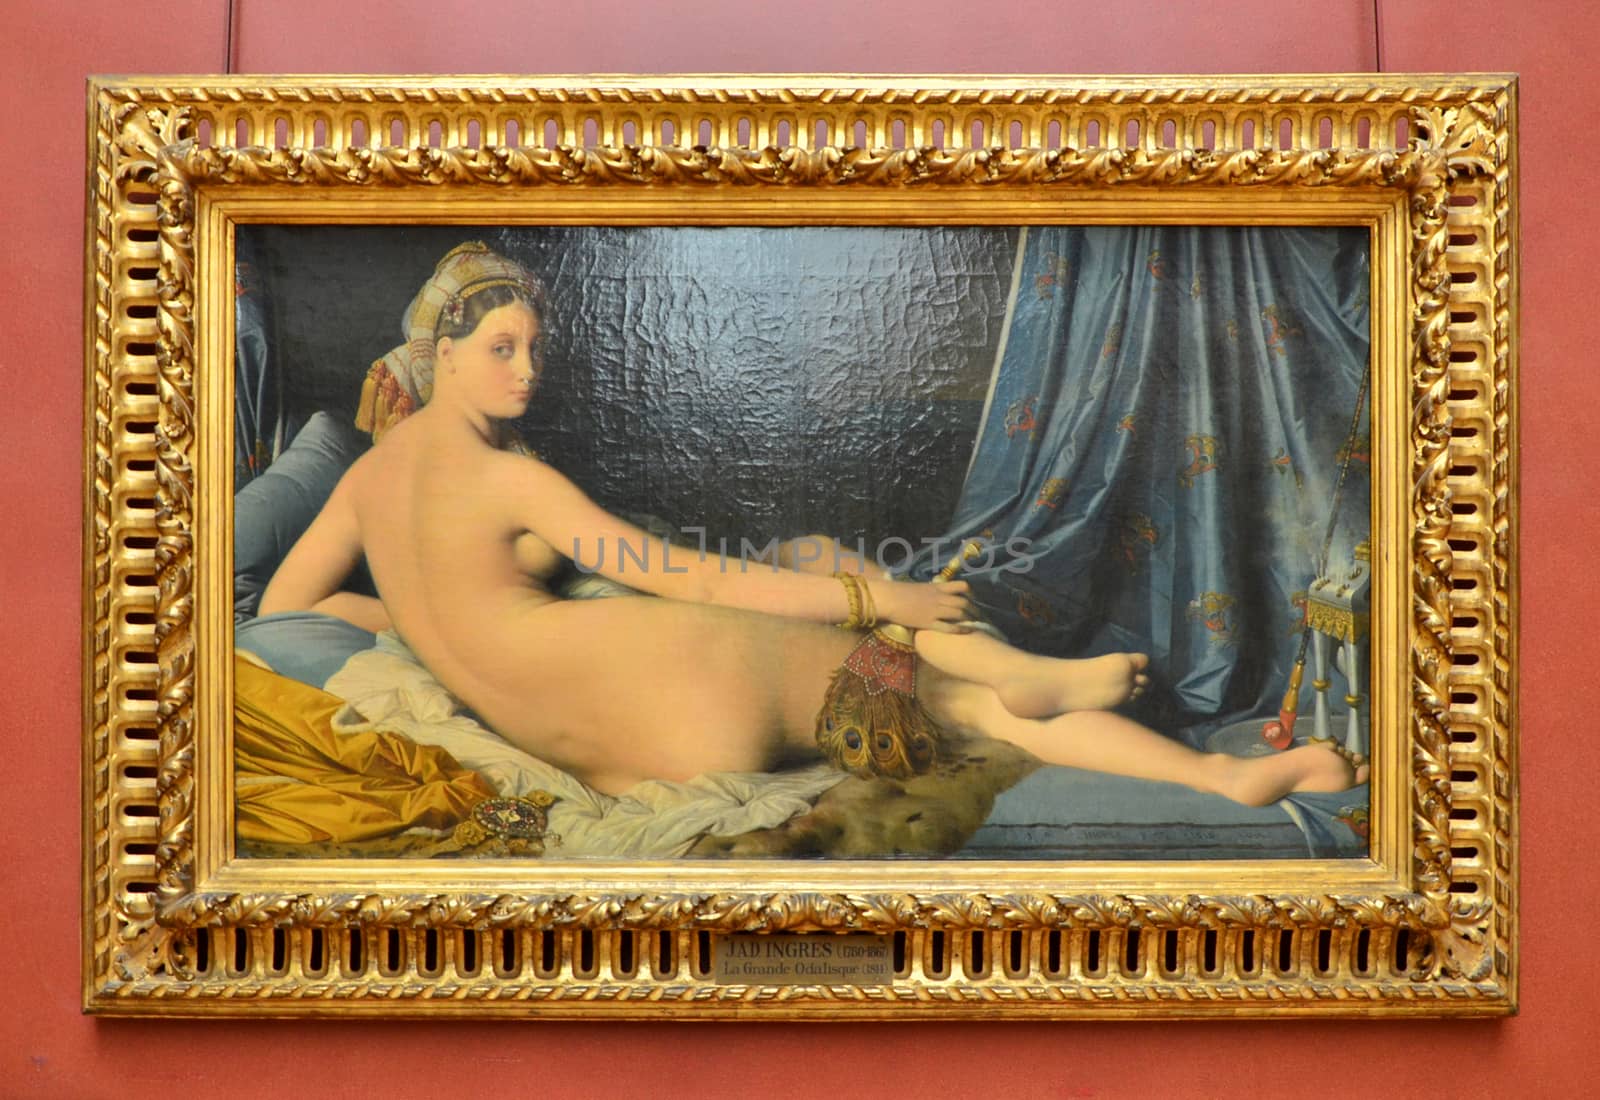 Paris, France - May 13, 2015: Grande Odalisque, is an oil painting of 1814 by Jean Auguste Dominique Ingres. The work is displayed in the Louvre. by siraanamwong